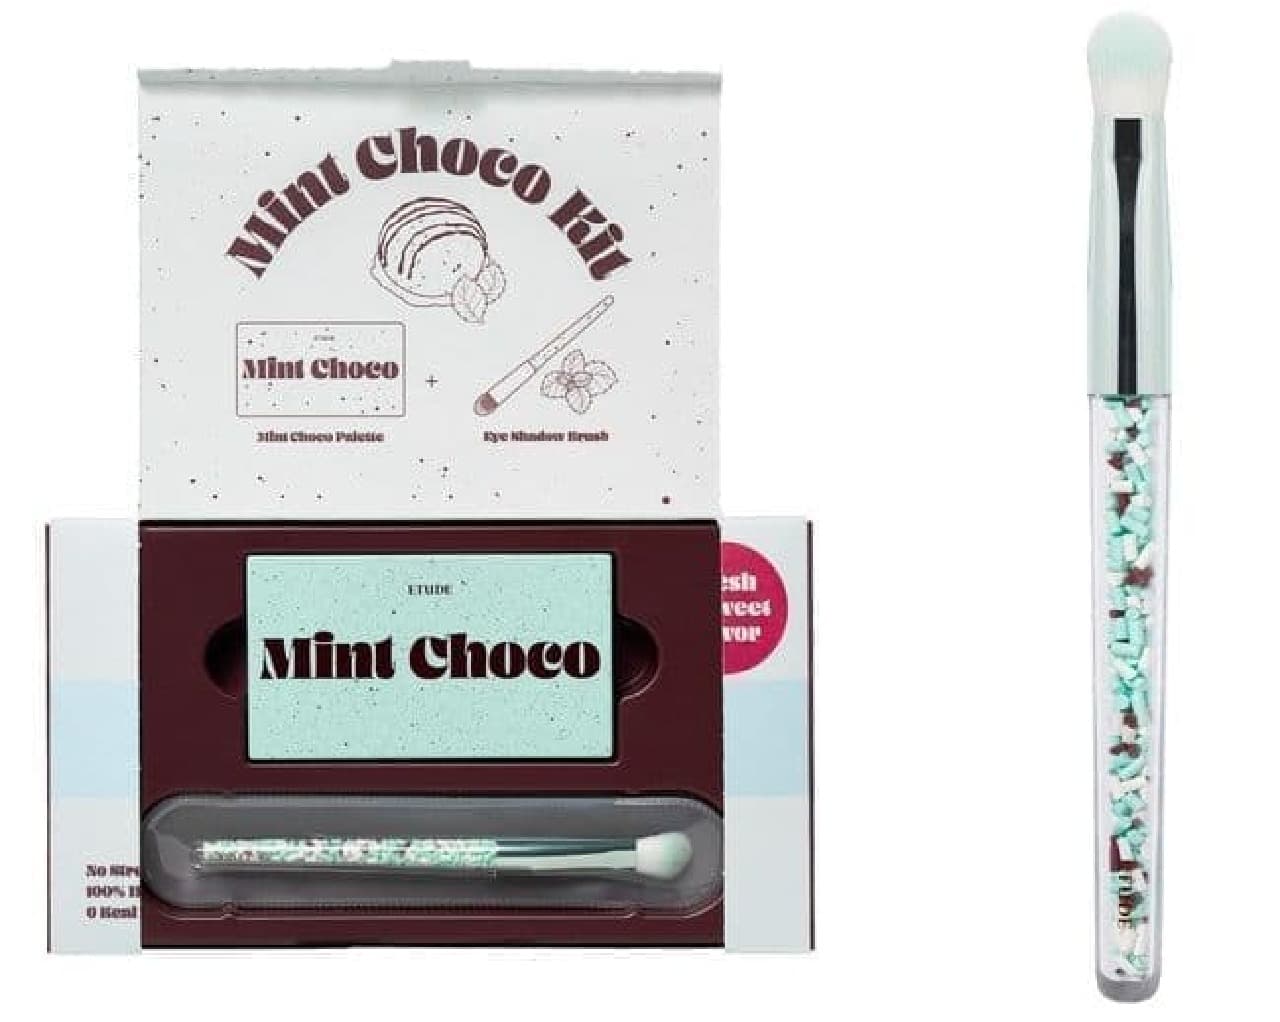 Etude House "Choco Mint Special Kit"